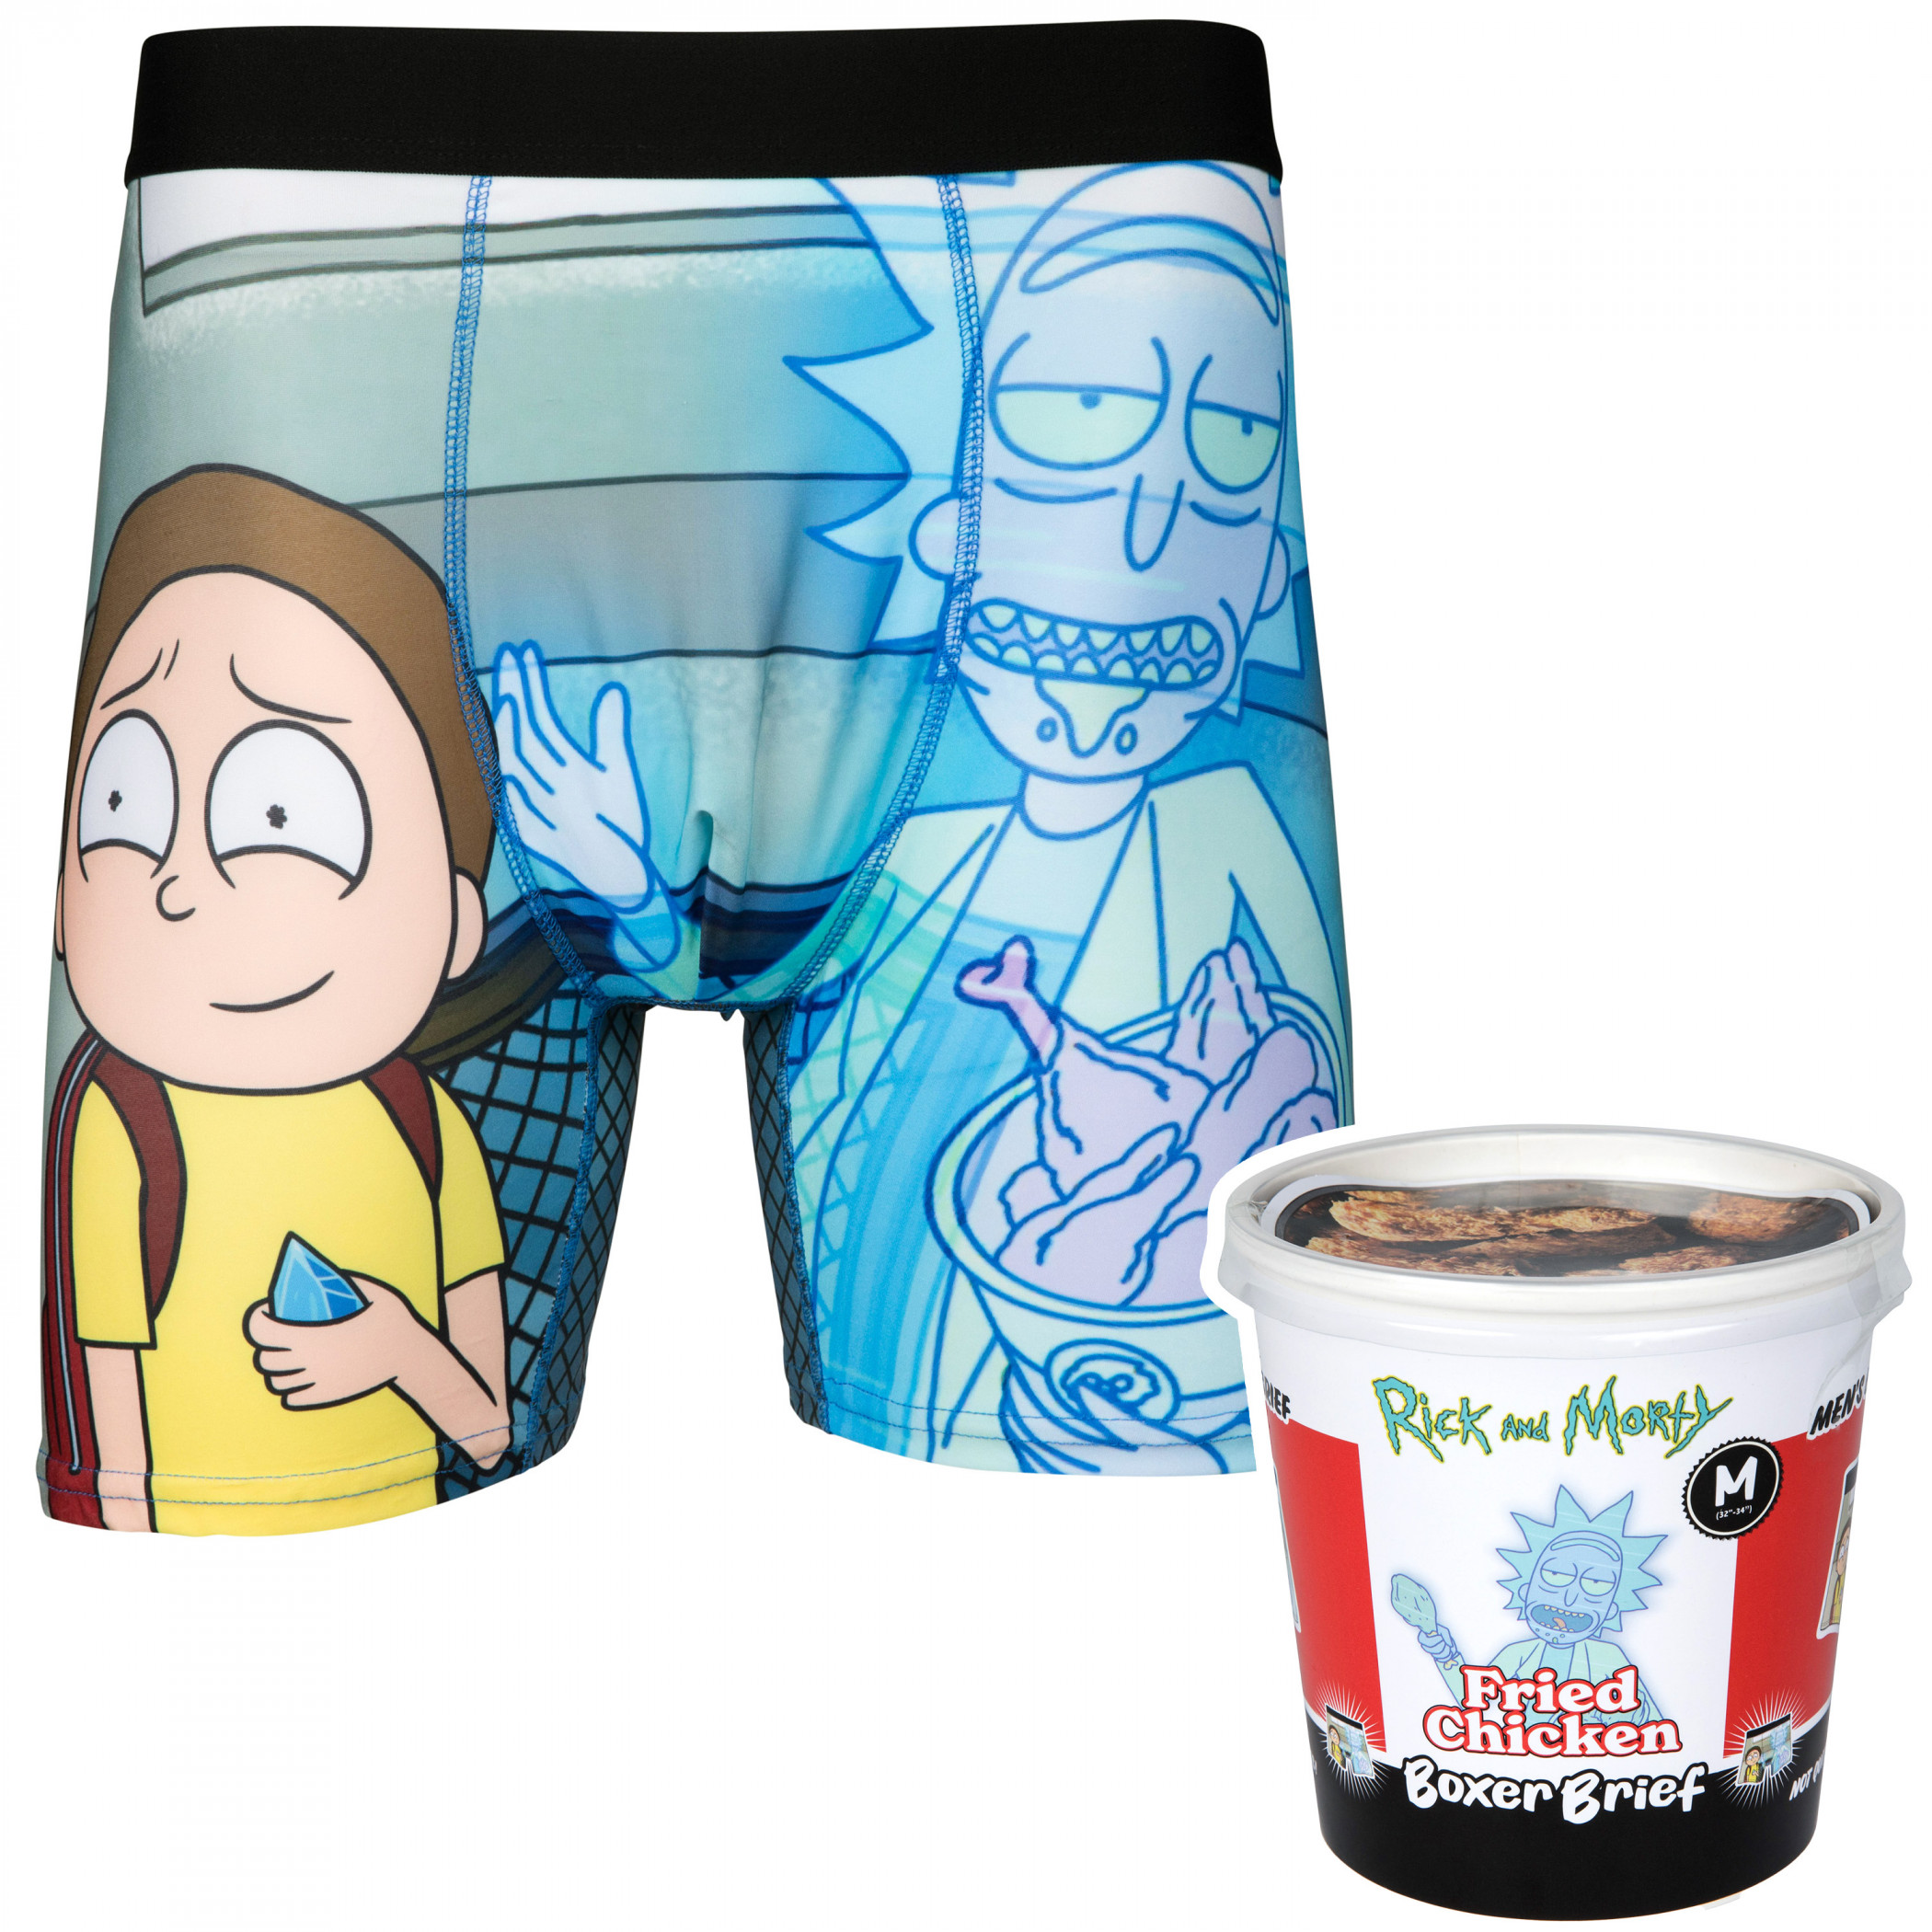 Rick And Morty Chicken Legs Boxer Briefs in Novelty Packaging